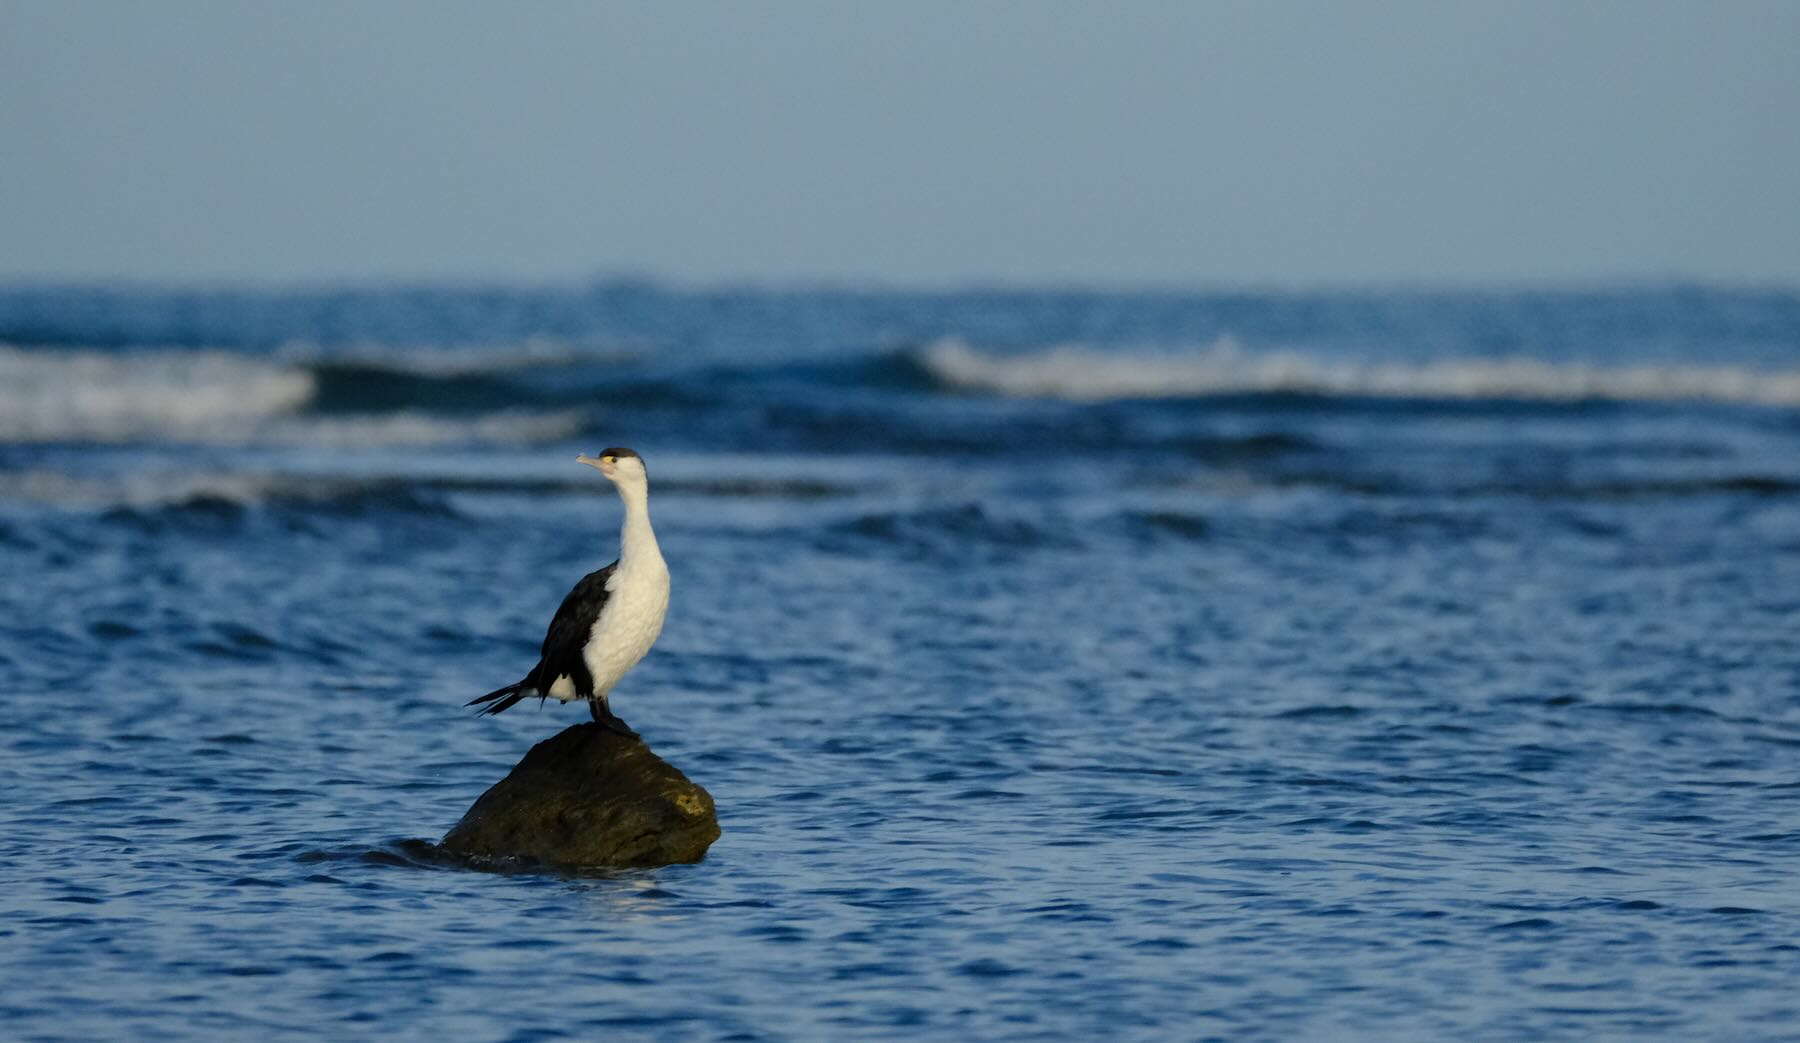 SHag perched on driftwood in the sea. 